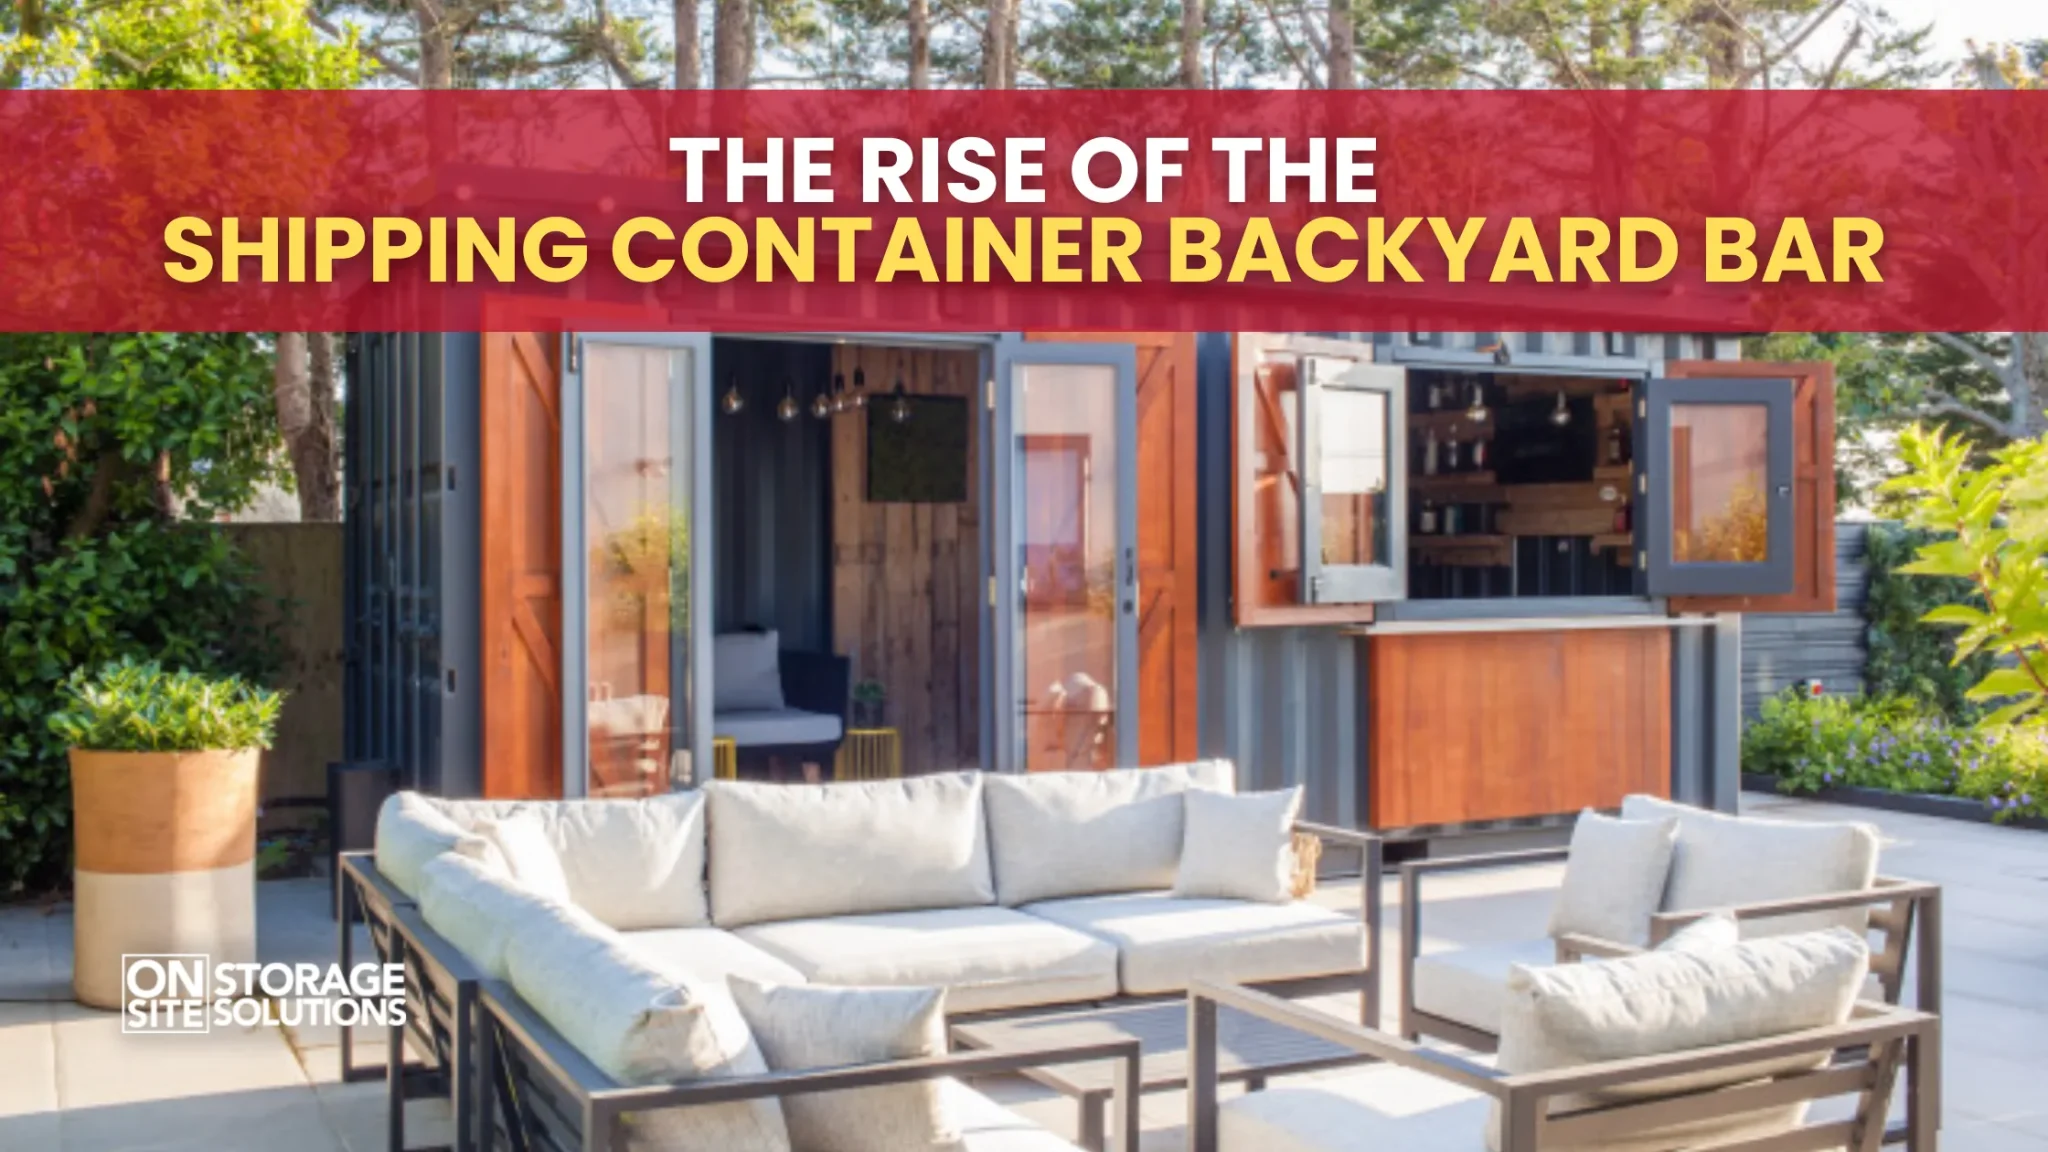 The Rise of the Shipping Container Backyard Bar